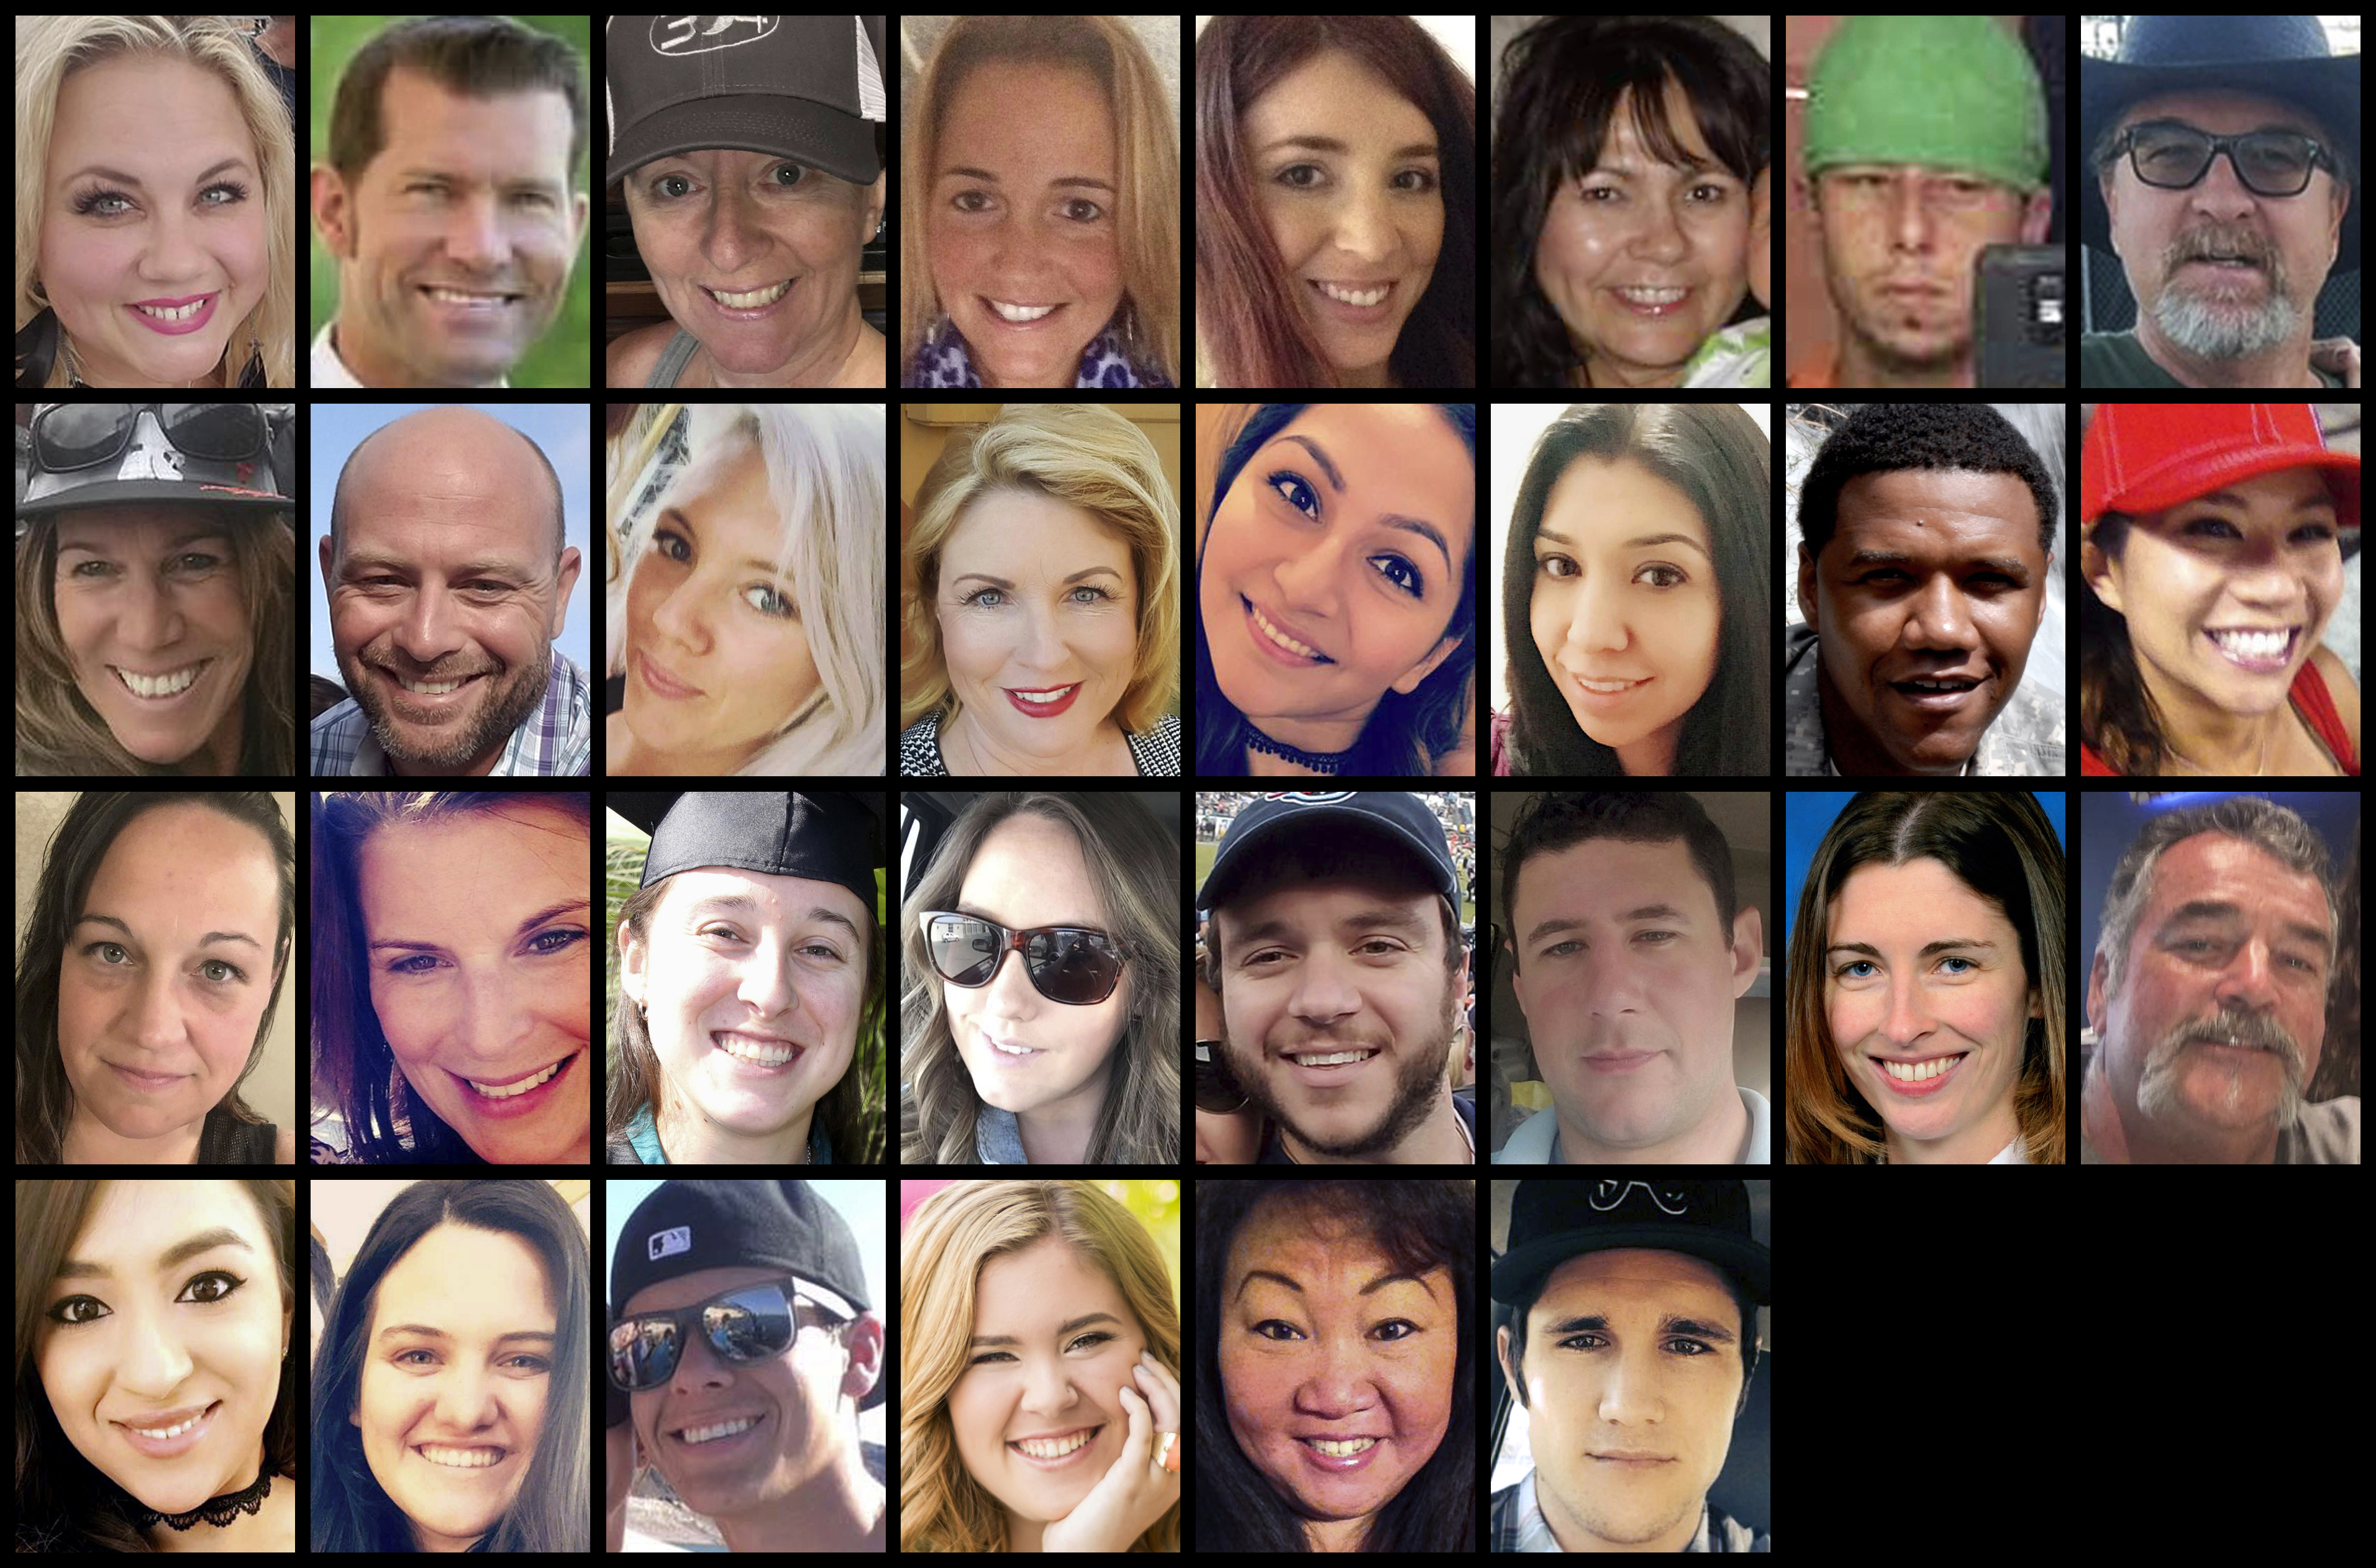 Some of the victims of the mass shooting in Las Vegas.